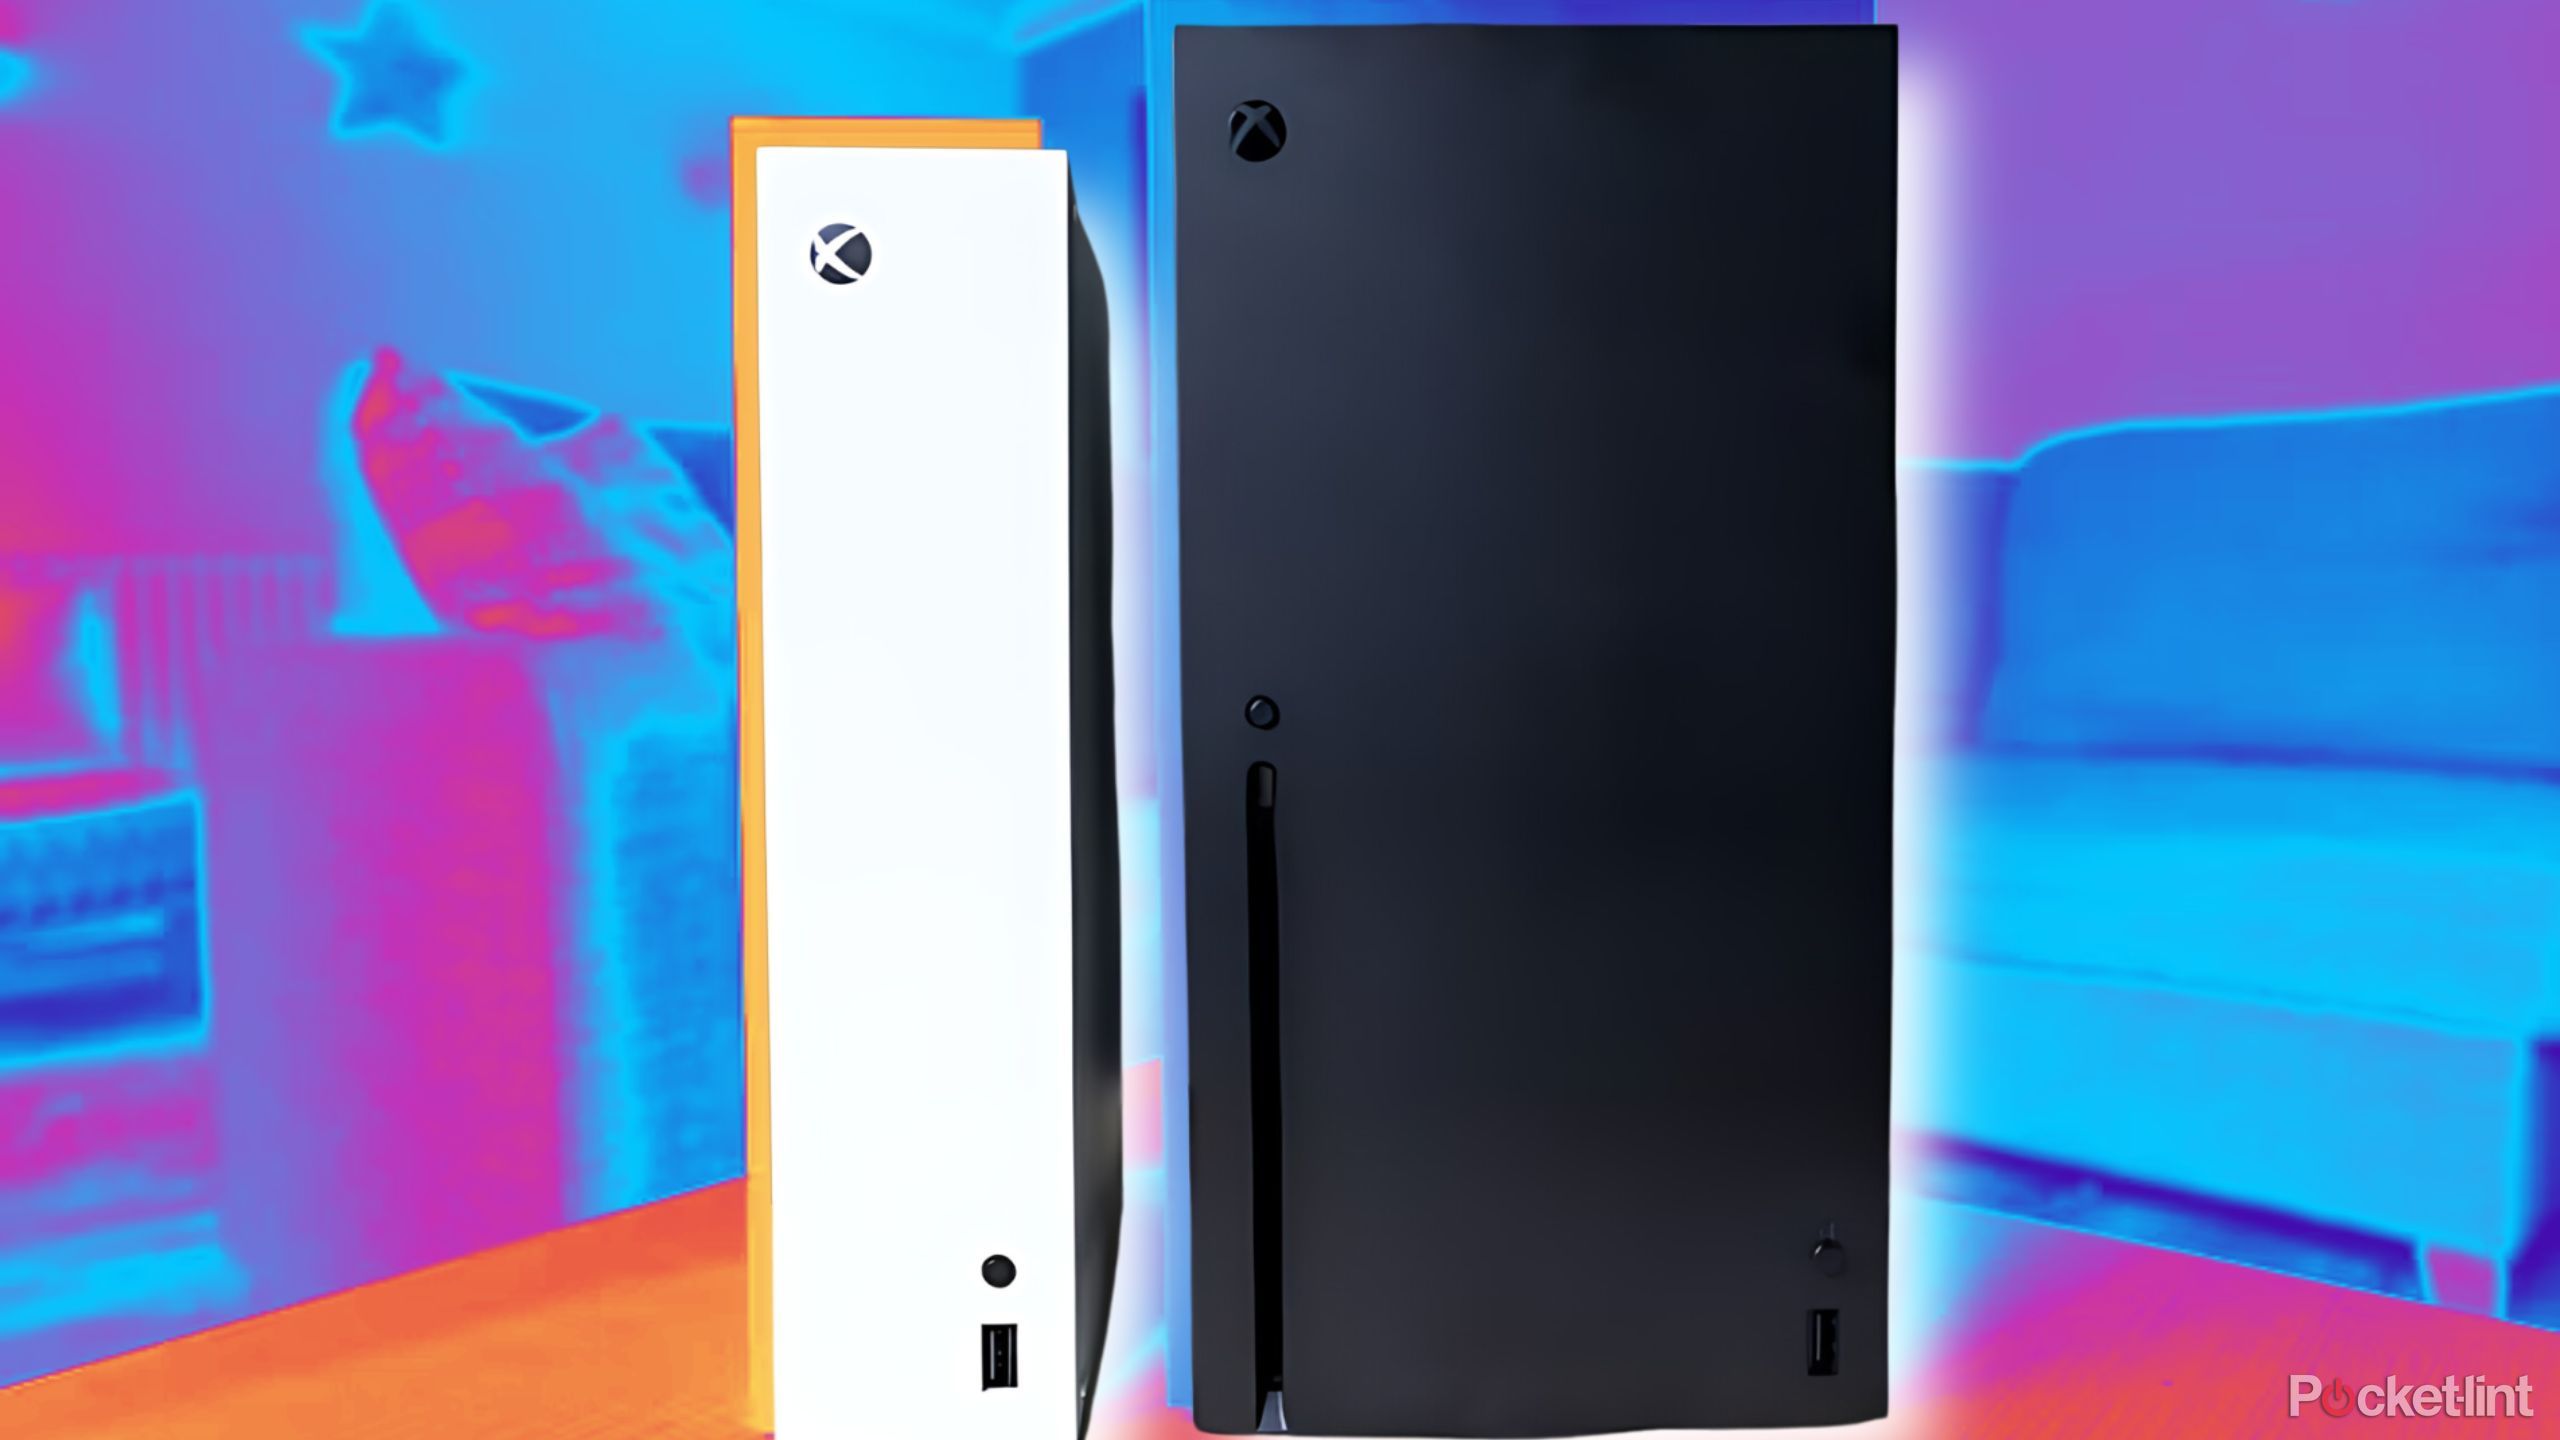 Xbox models with bright colors